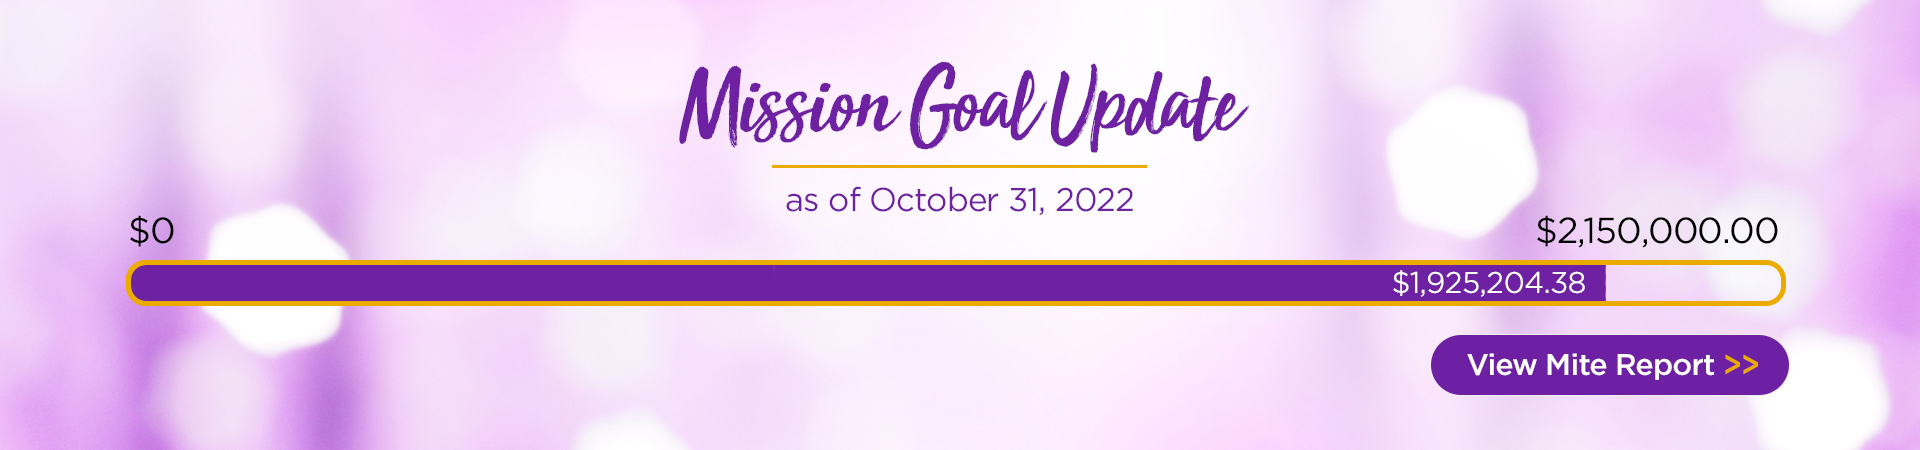 Mission Goal Update as of October 31, 2022. View Mite Report.